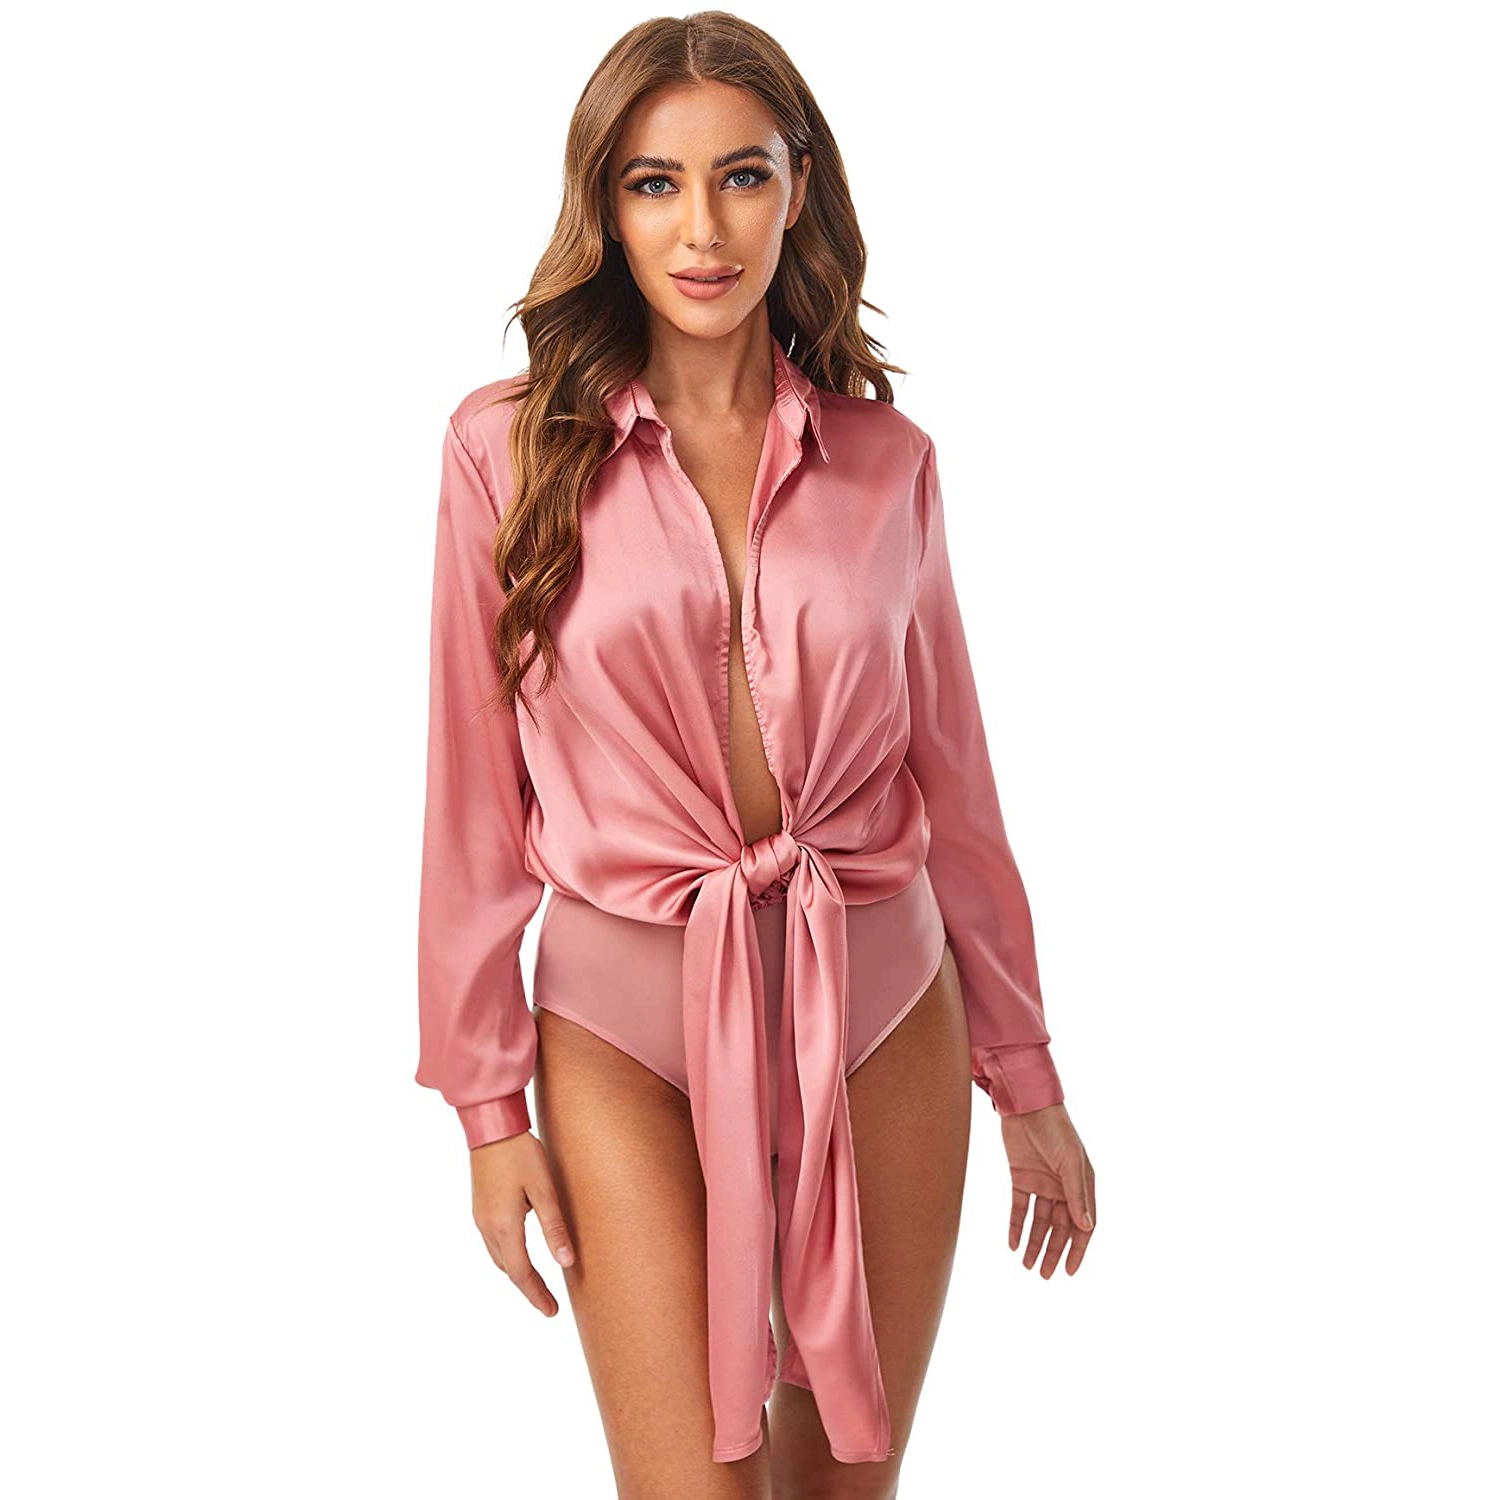 Women Bow Tie Satin Bodysuit Plunging Neck Sexy Long Sleeve Blouse Top Apparel